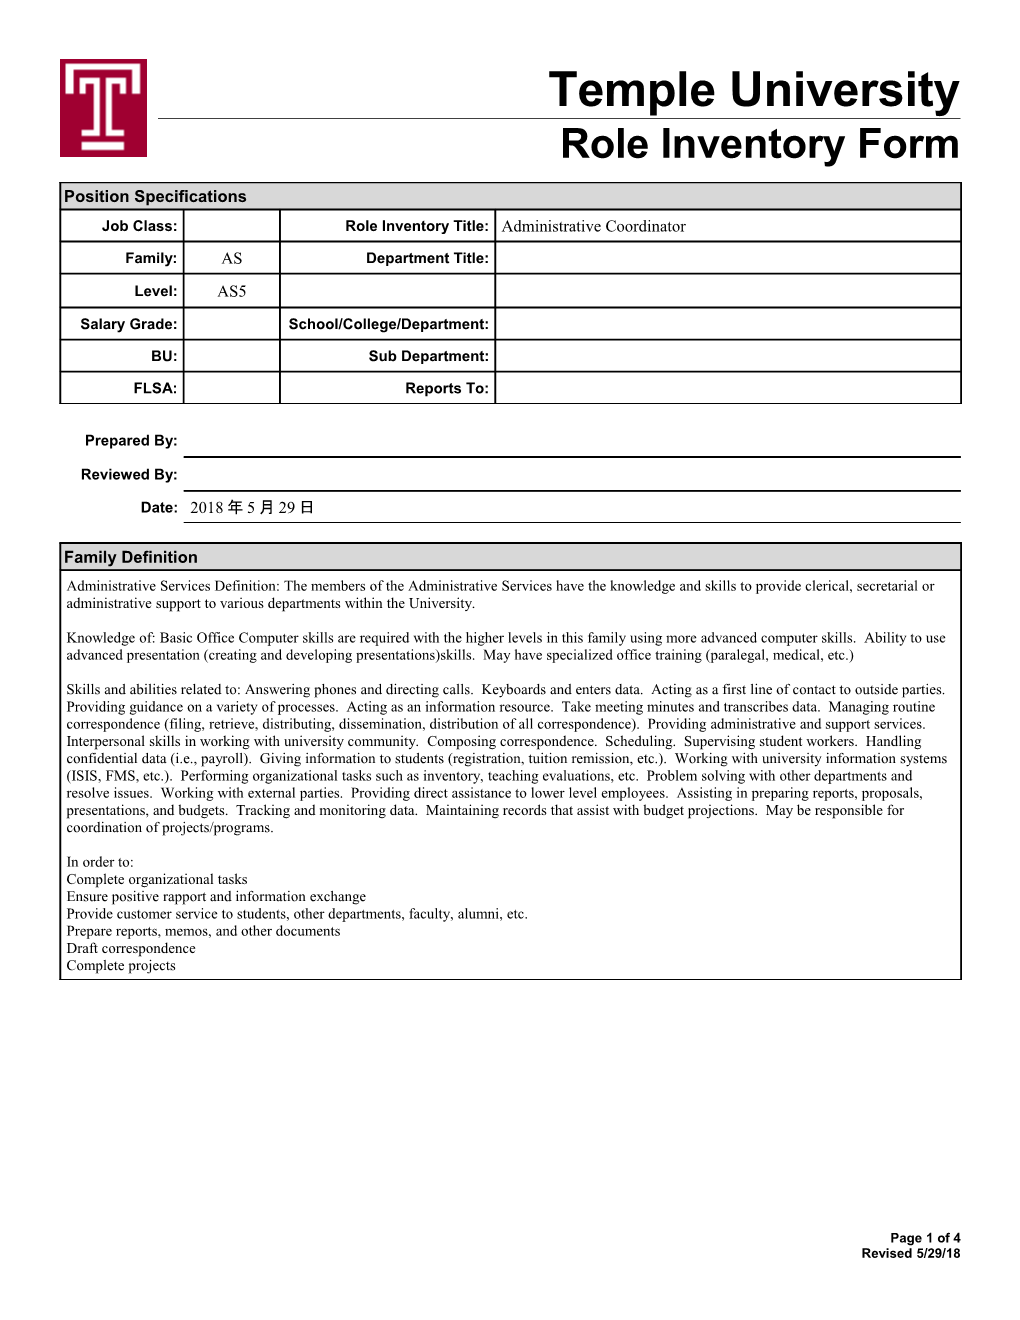 Role Inventory Form